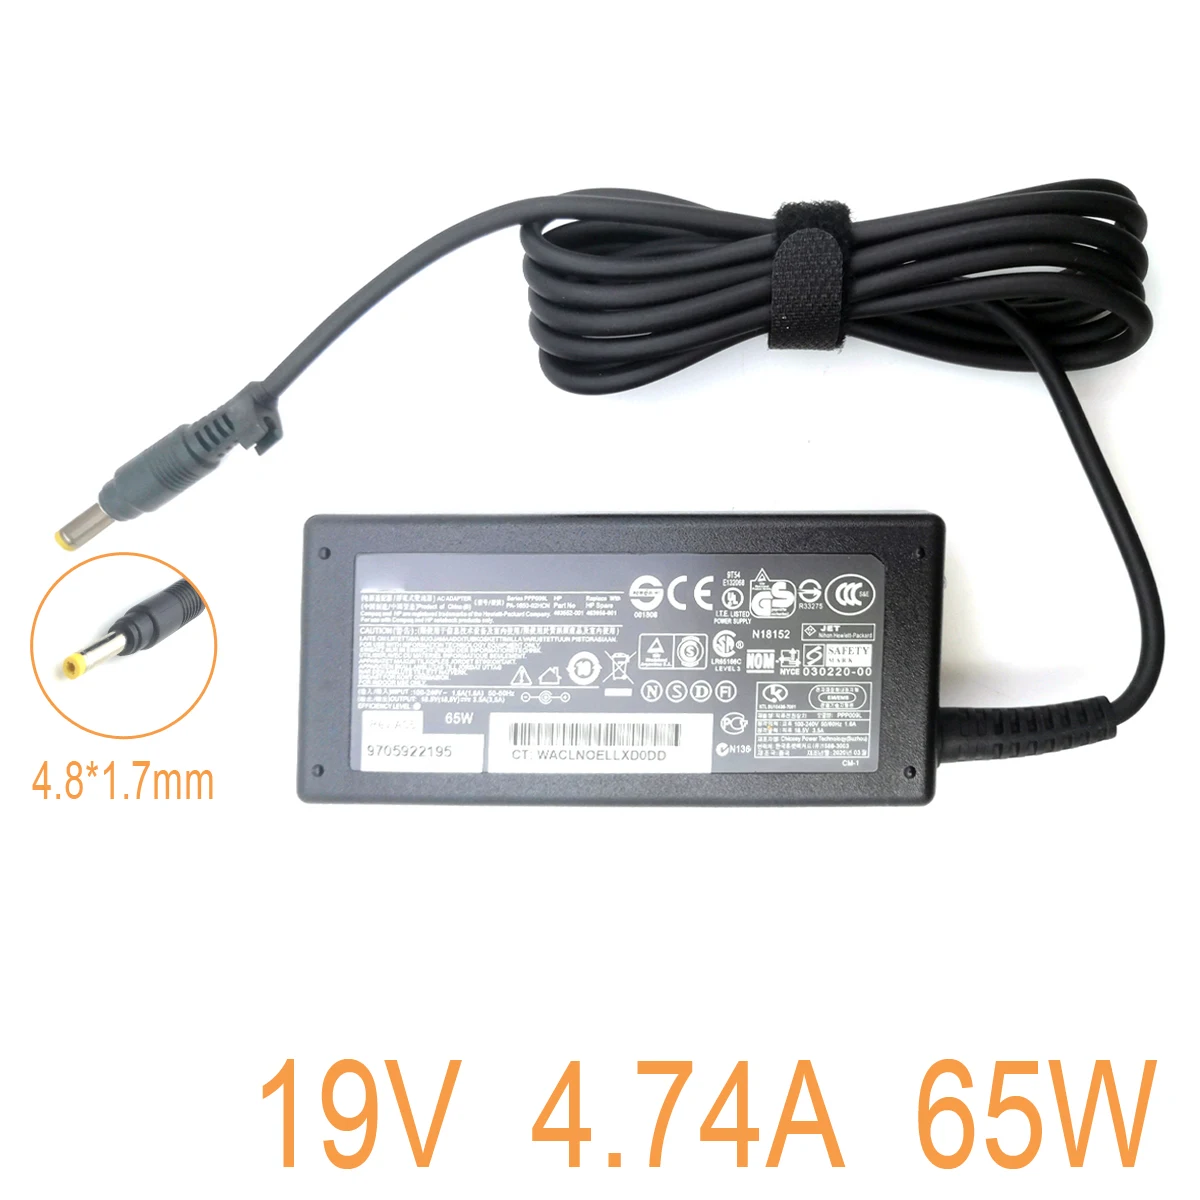 

18.5V 3.5A 65W laptop charger for HP DC359A#ABA DL606A DL606A#ABA LPAC03 OK065B13 PPP009H PPP009L PPP009S 613149-001 ZE4900